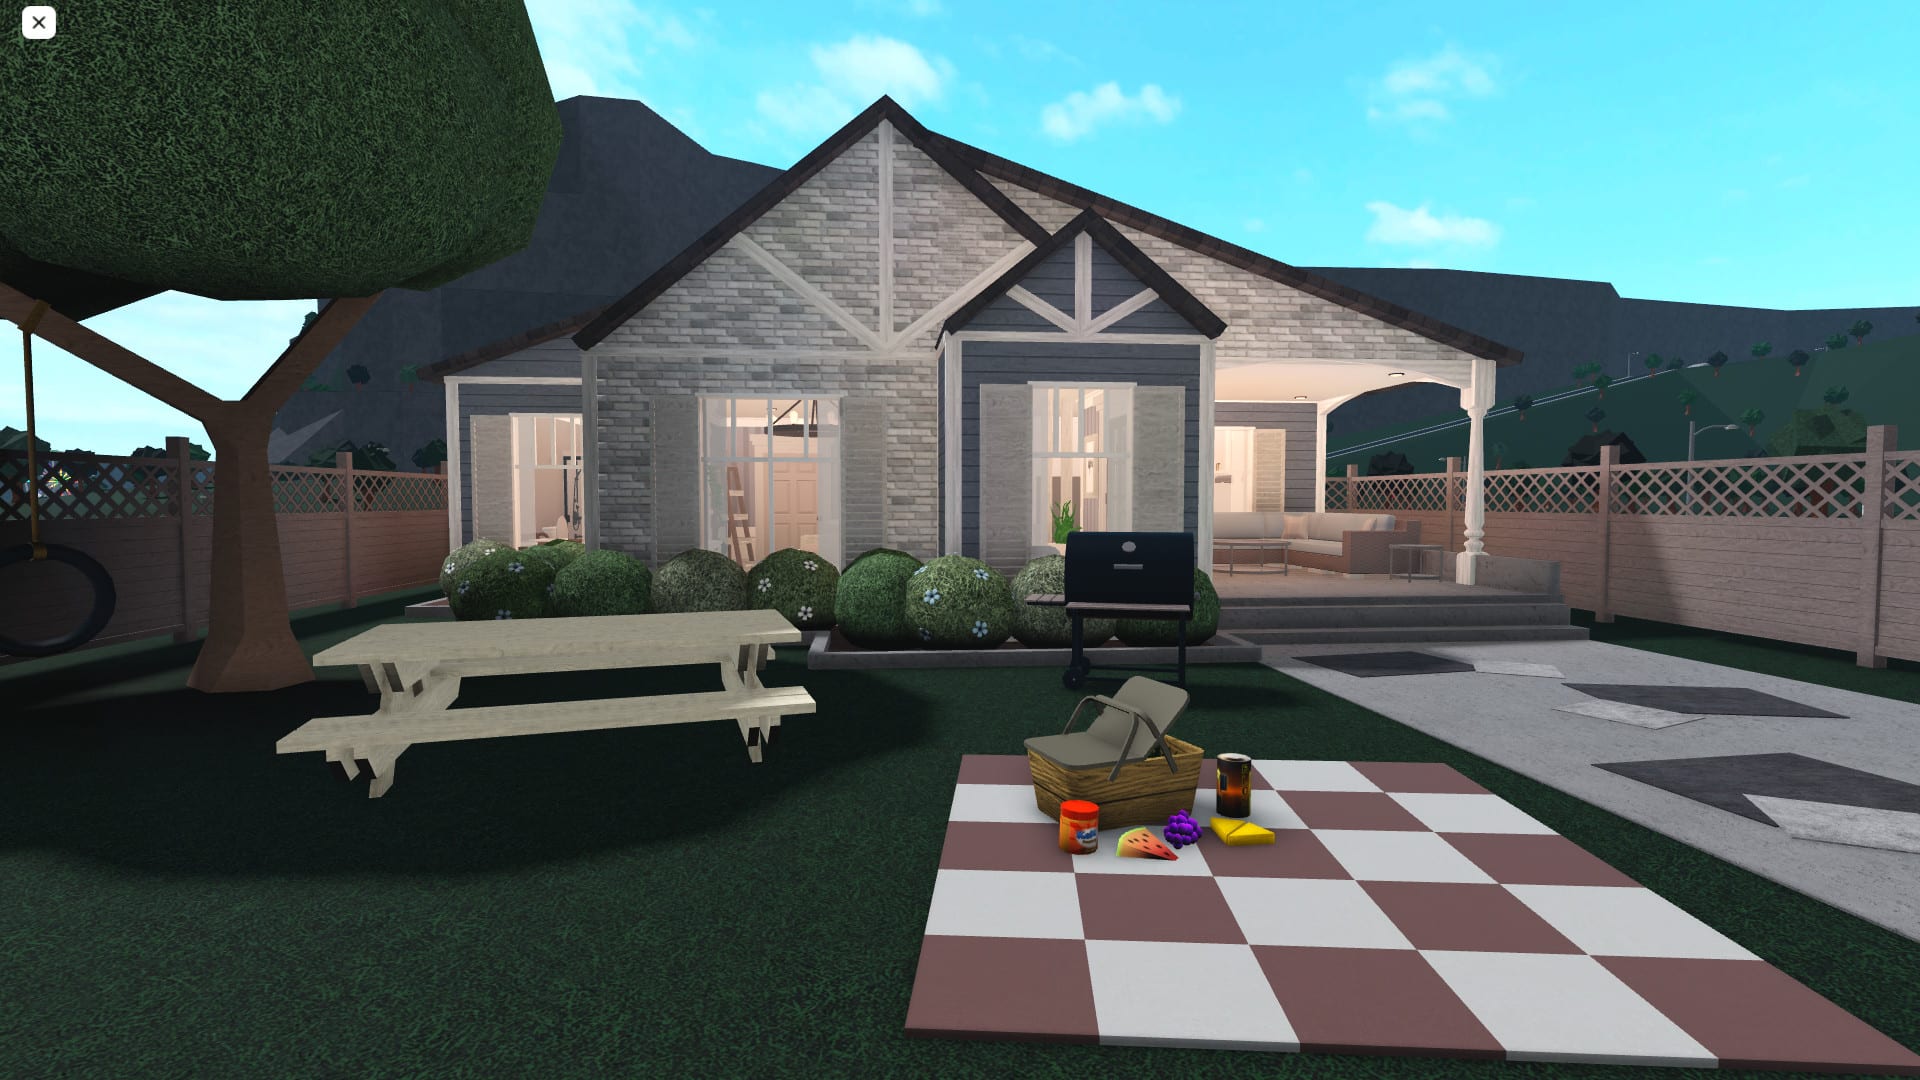 Build you a house in bloxburg, fully customized by Xxaminaaxx